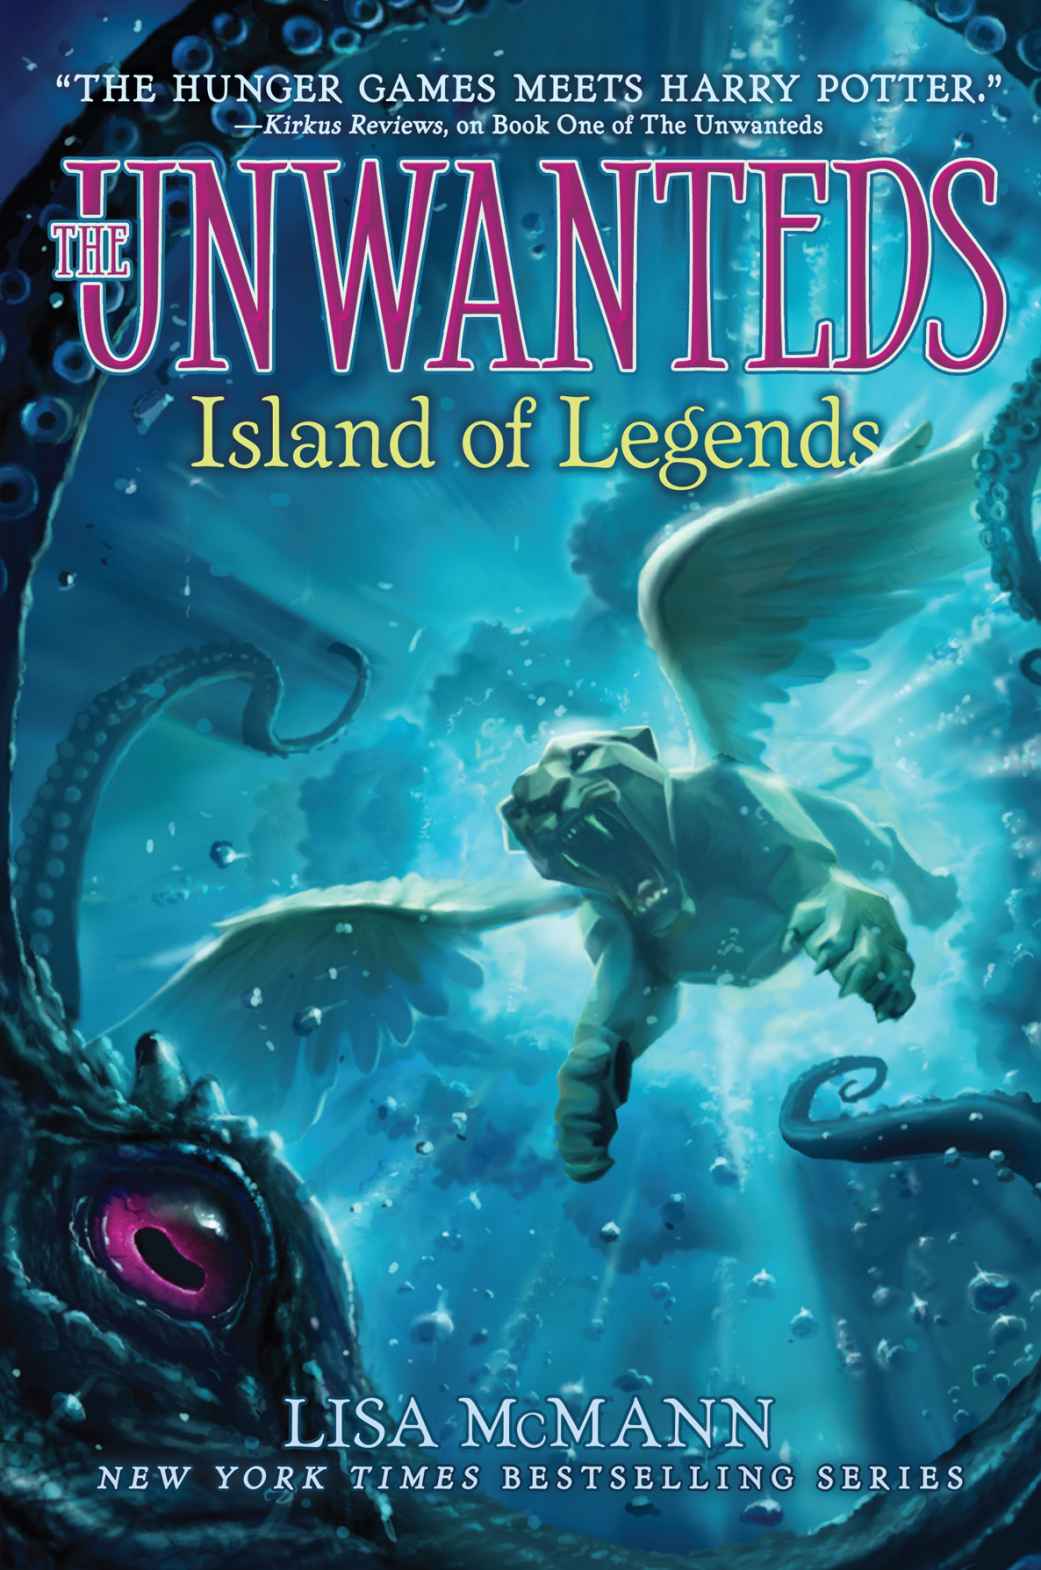 Island of Legends (The Unwanteds) by Lisa McMann